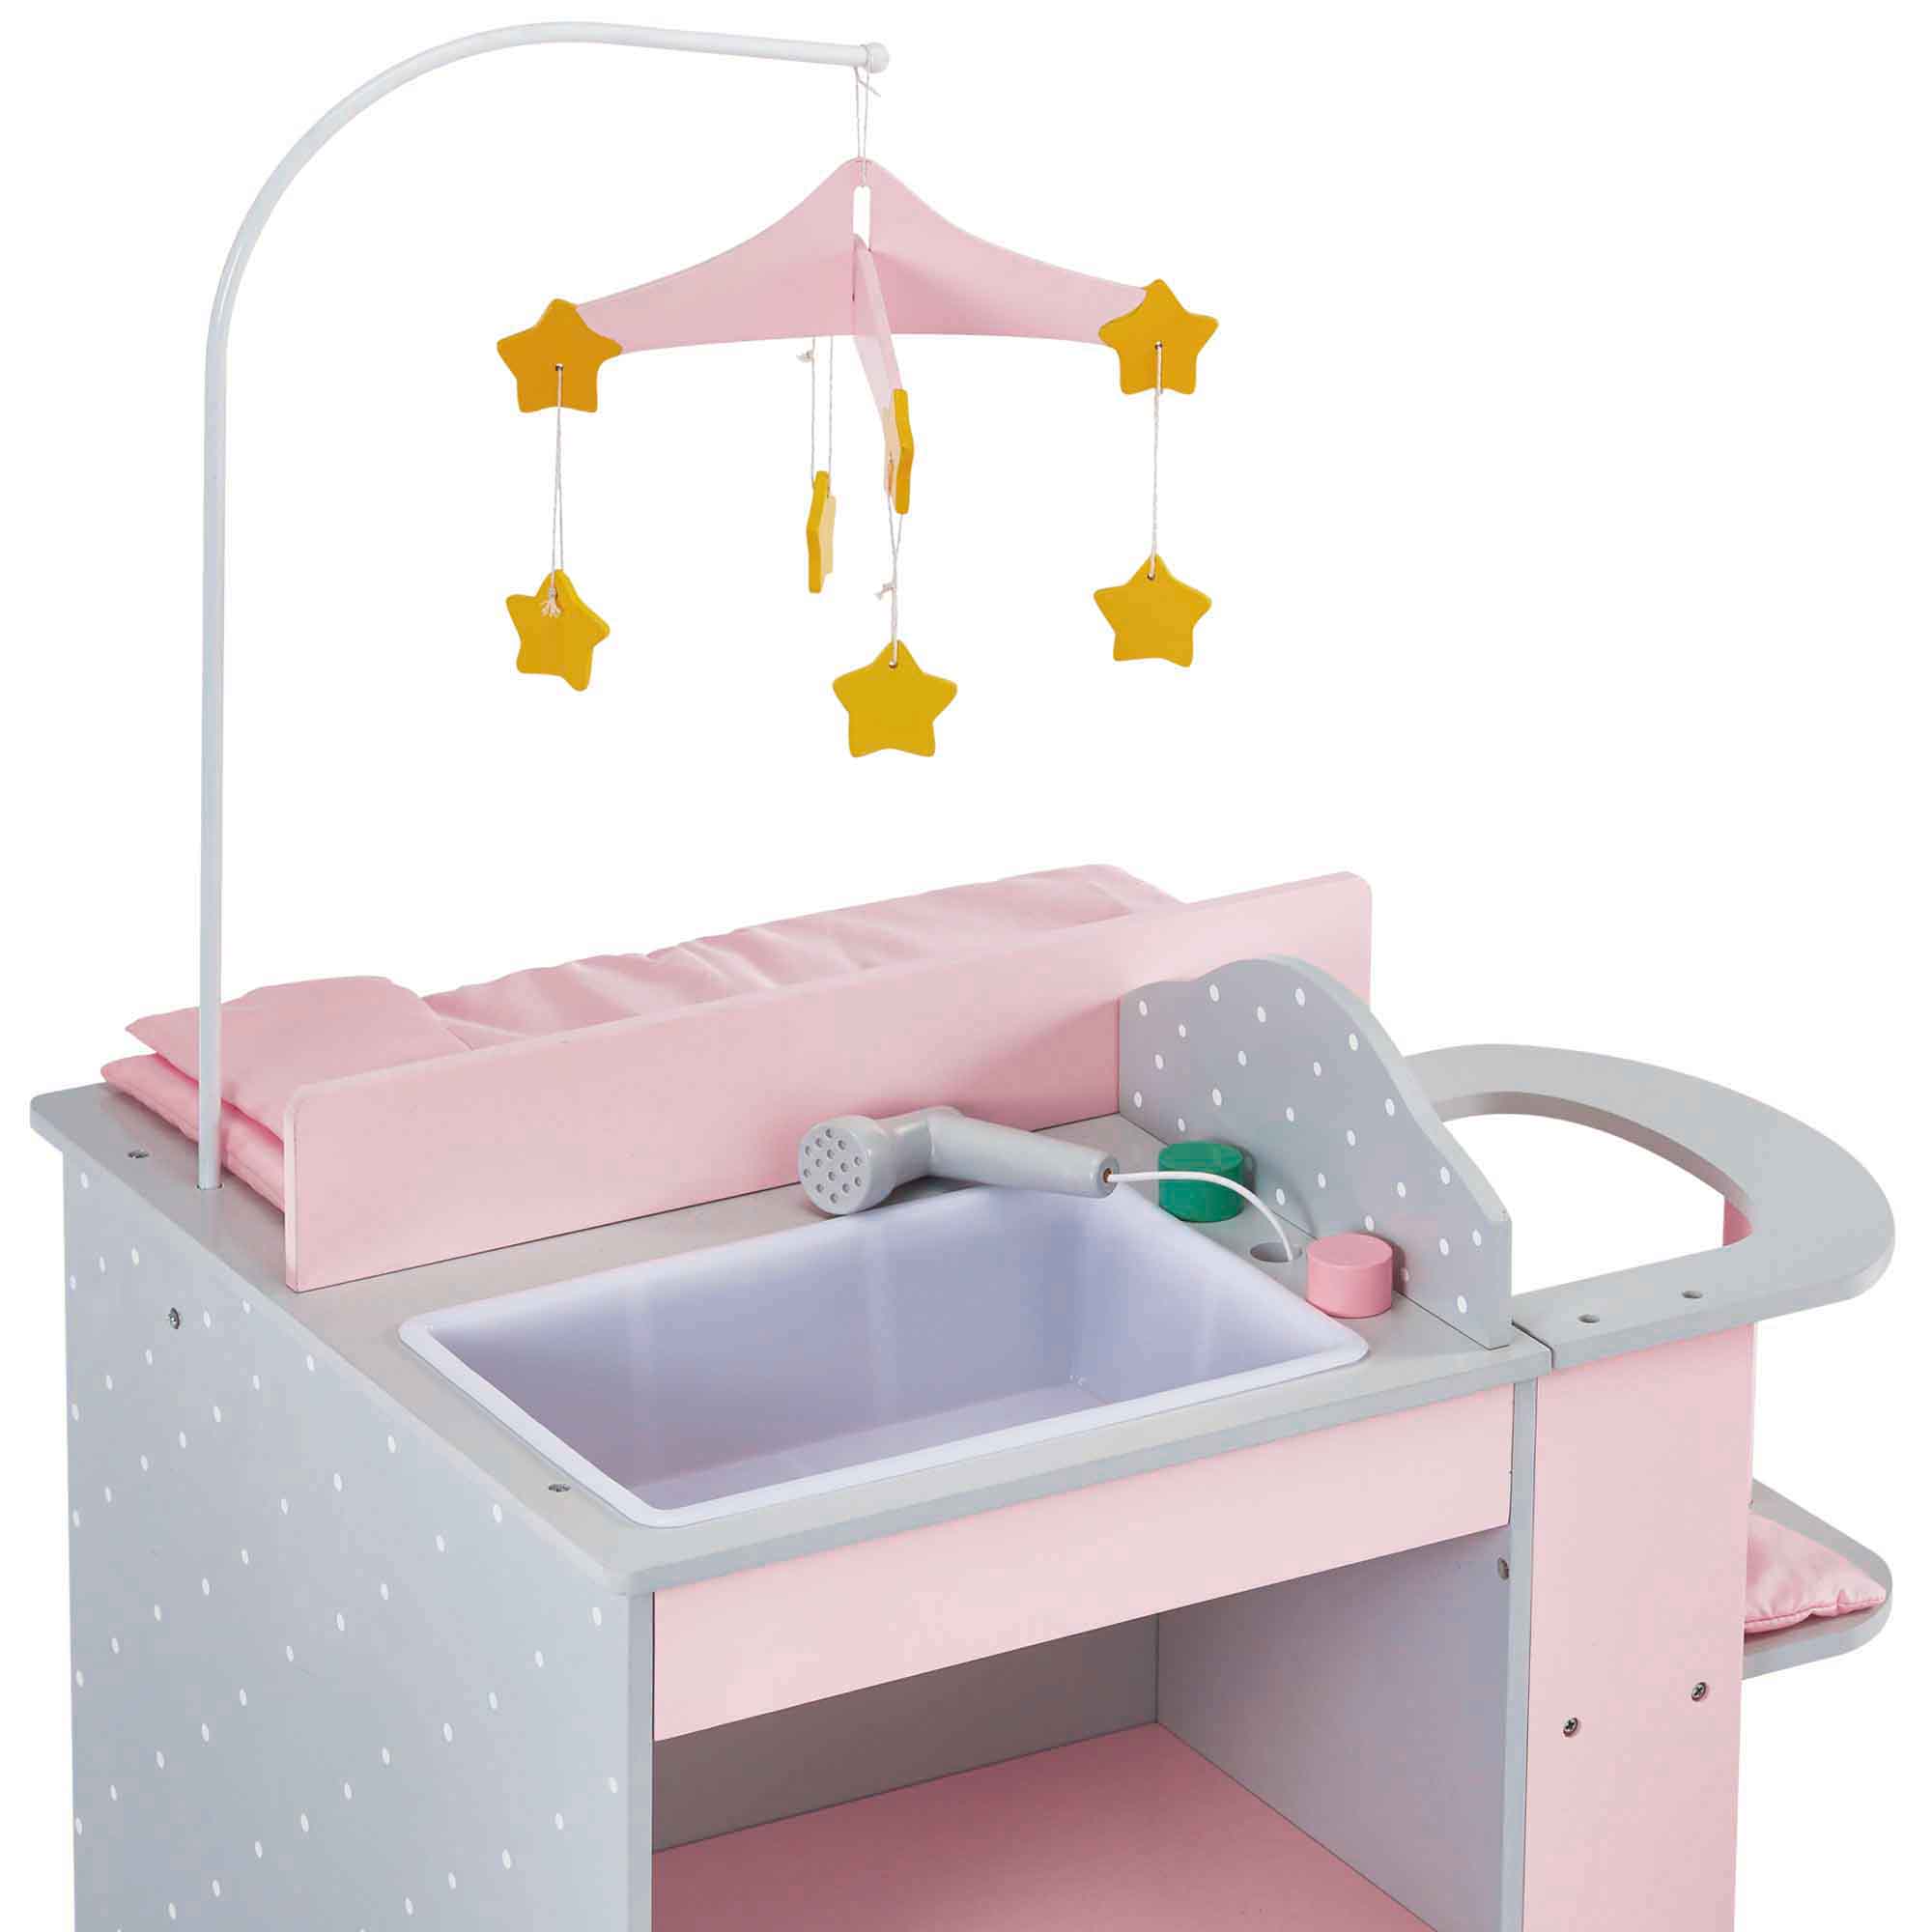 Olivia's Little World Kids Polka Dots Princess Baby Doll Changing Station with Storage, Gray/Pink